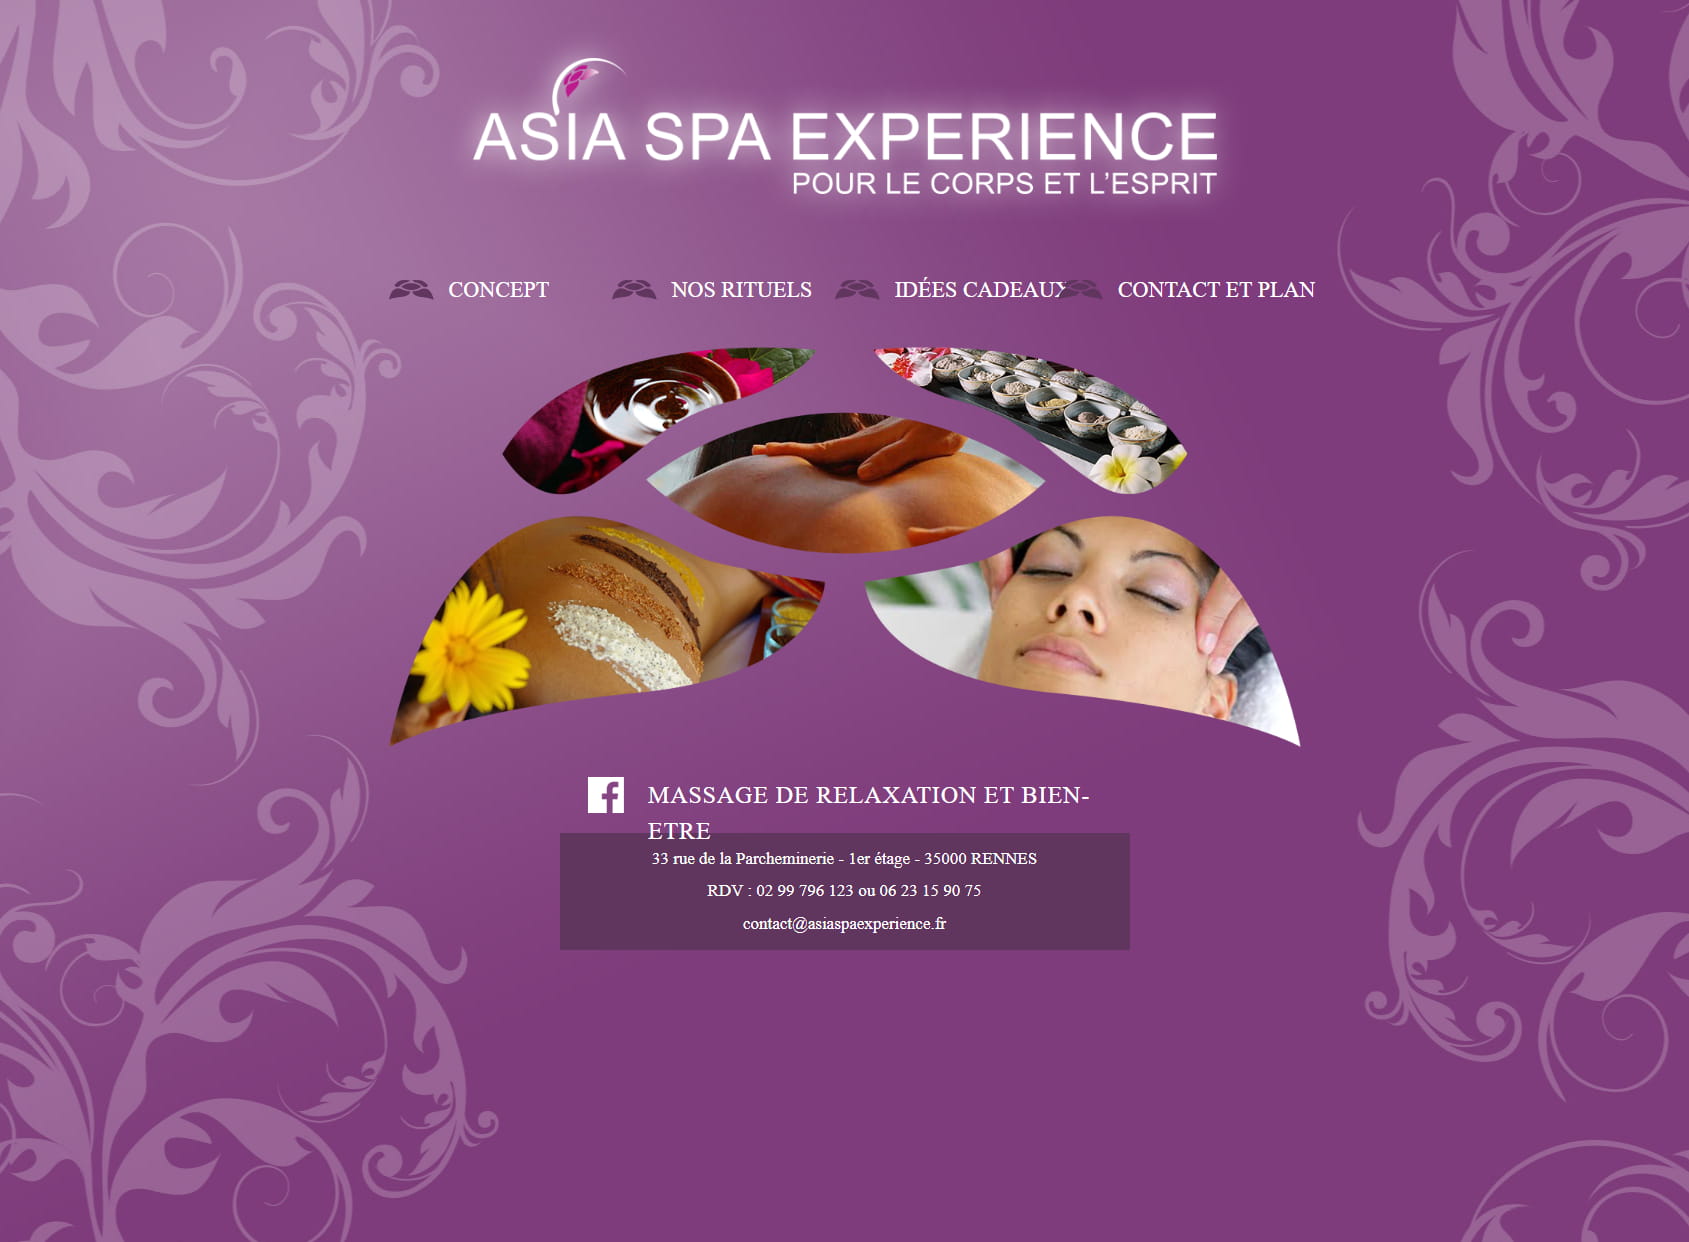 Asia Spa Experience